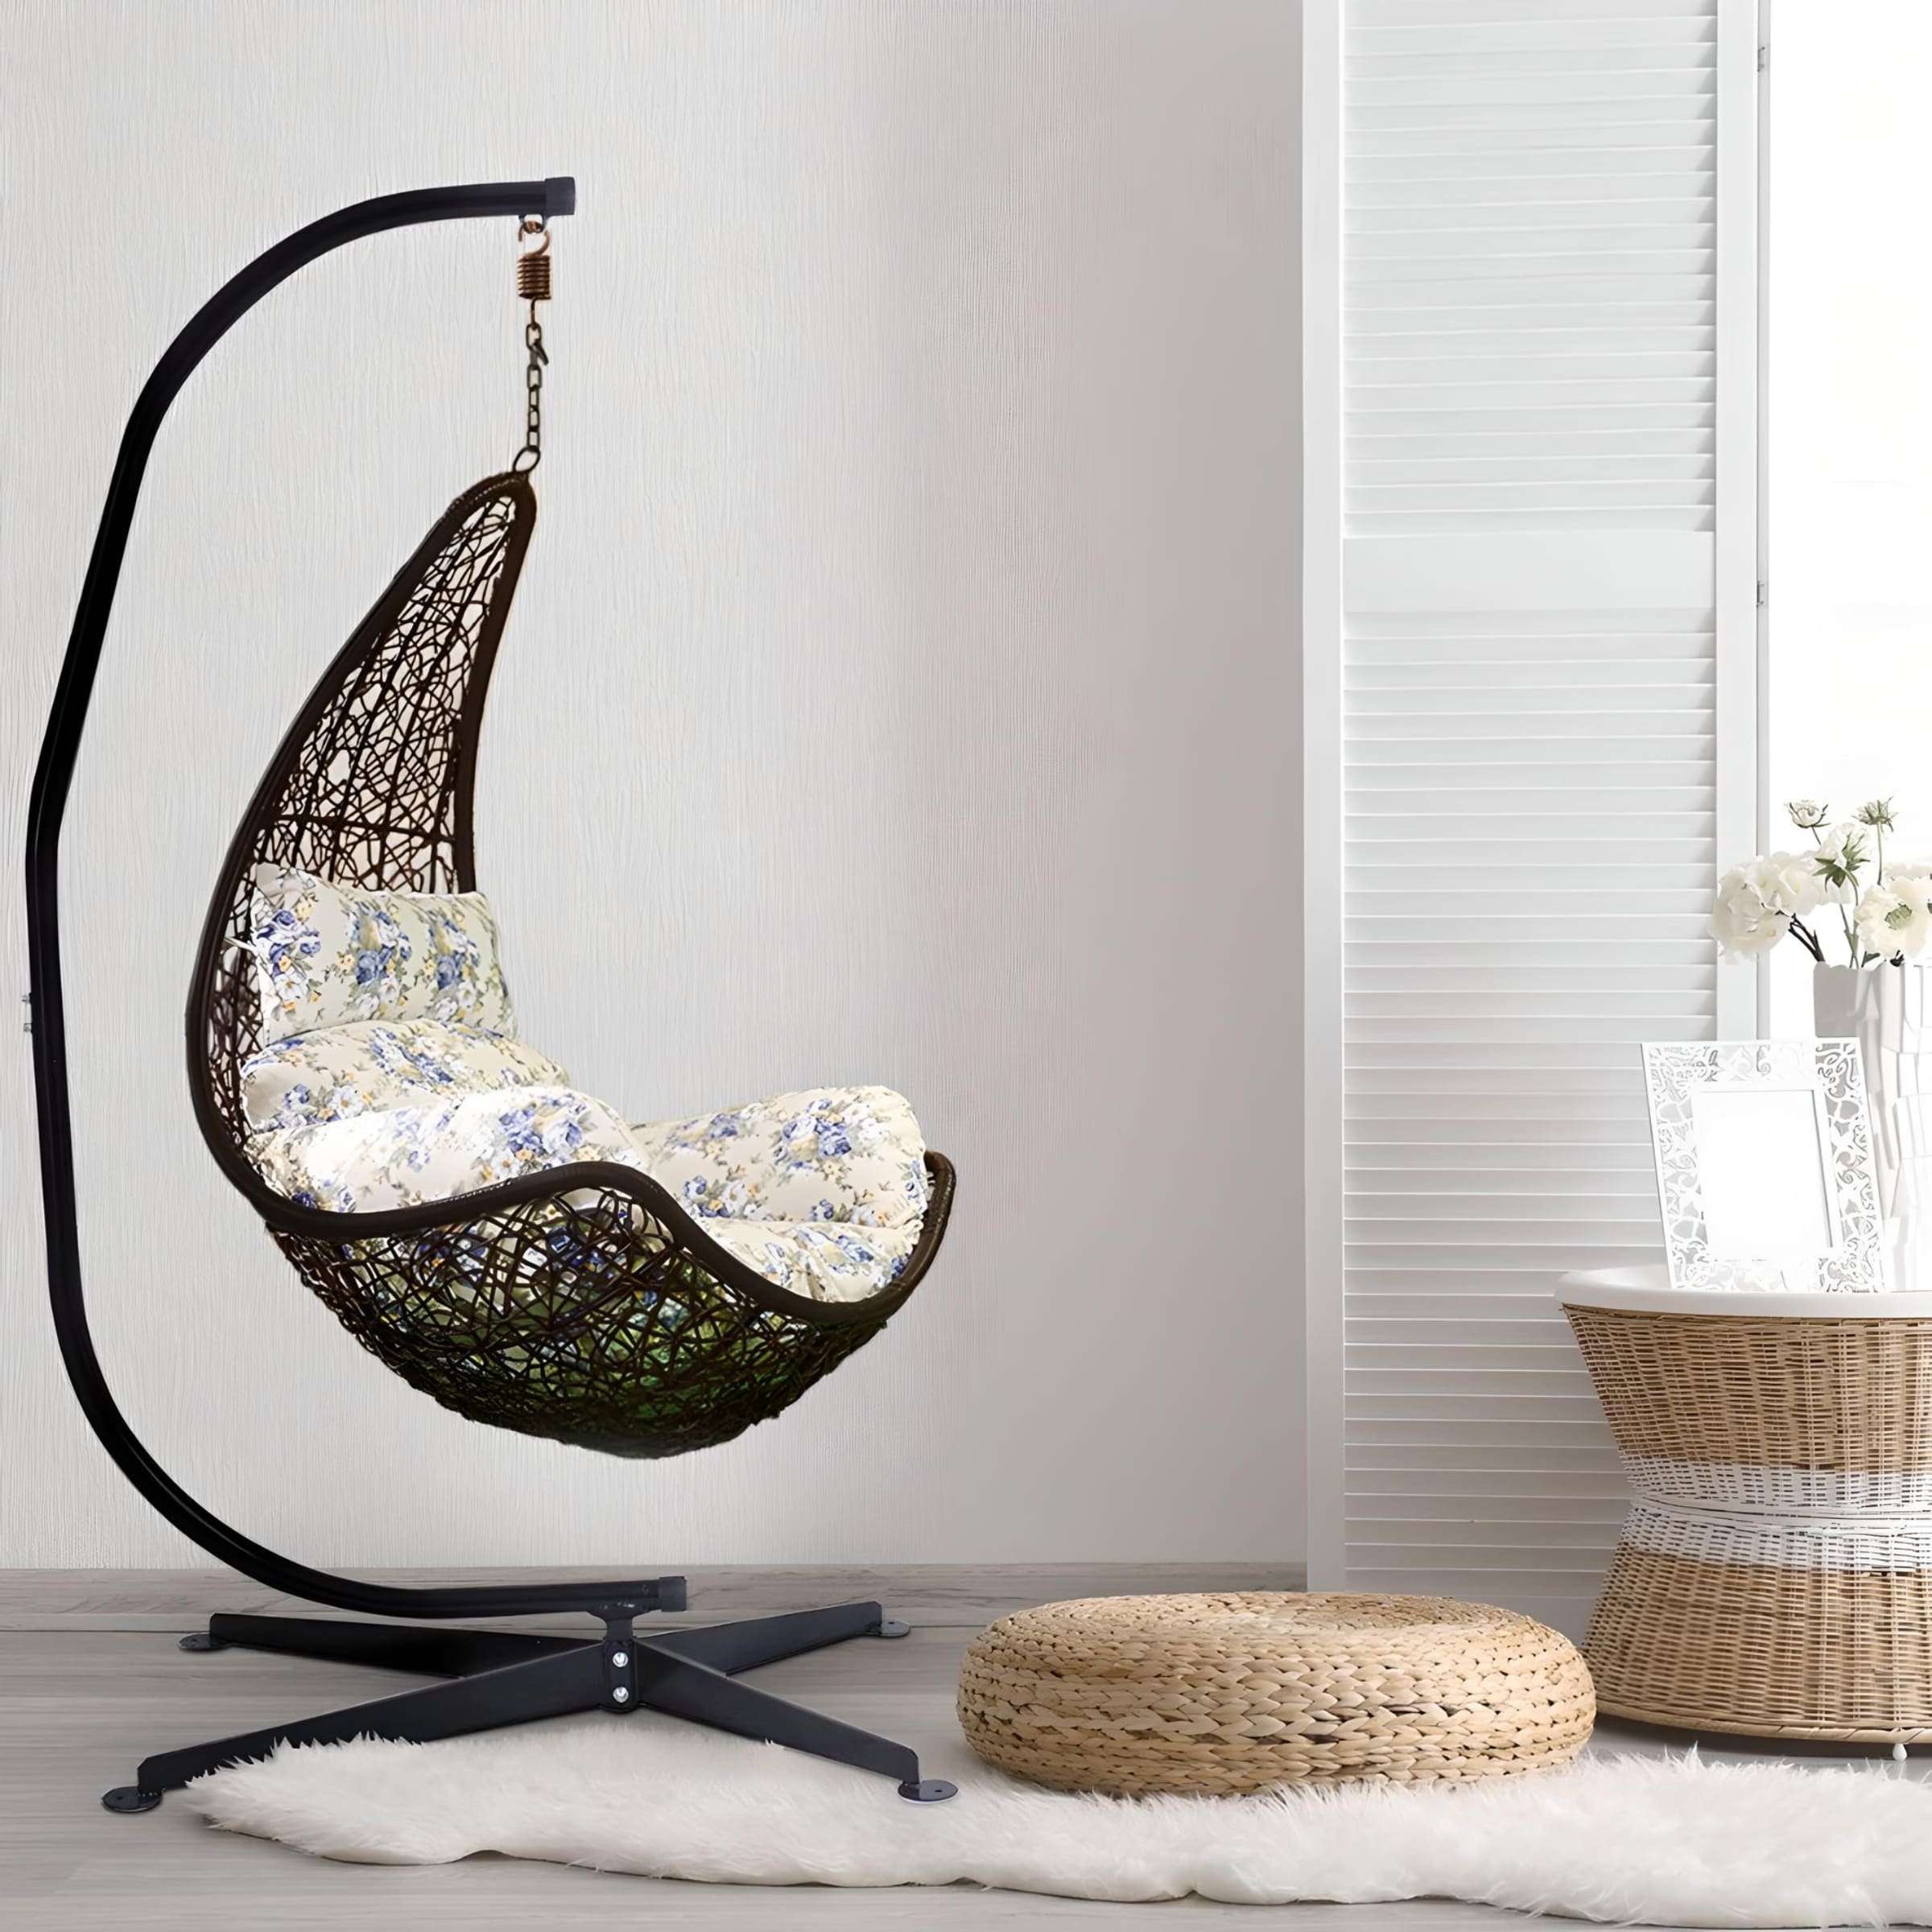 egg-shaped-swing-chair-with-demo